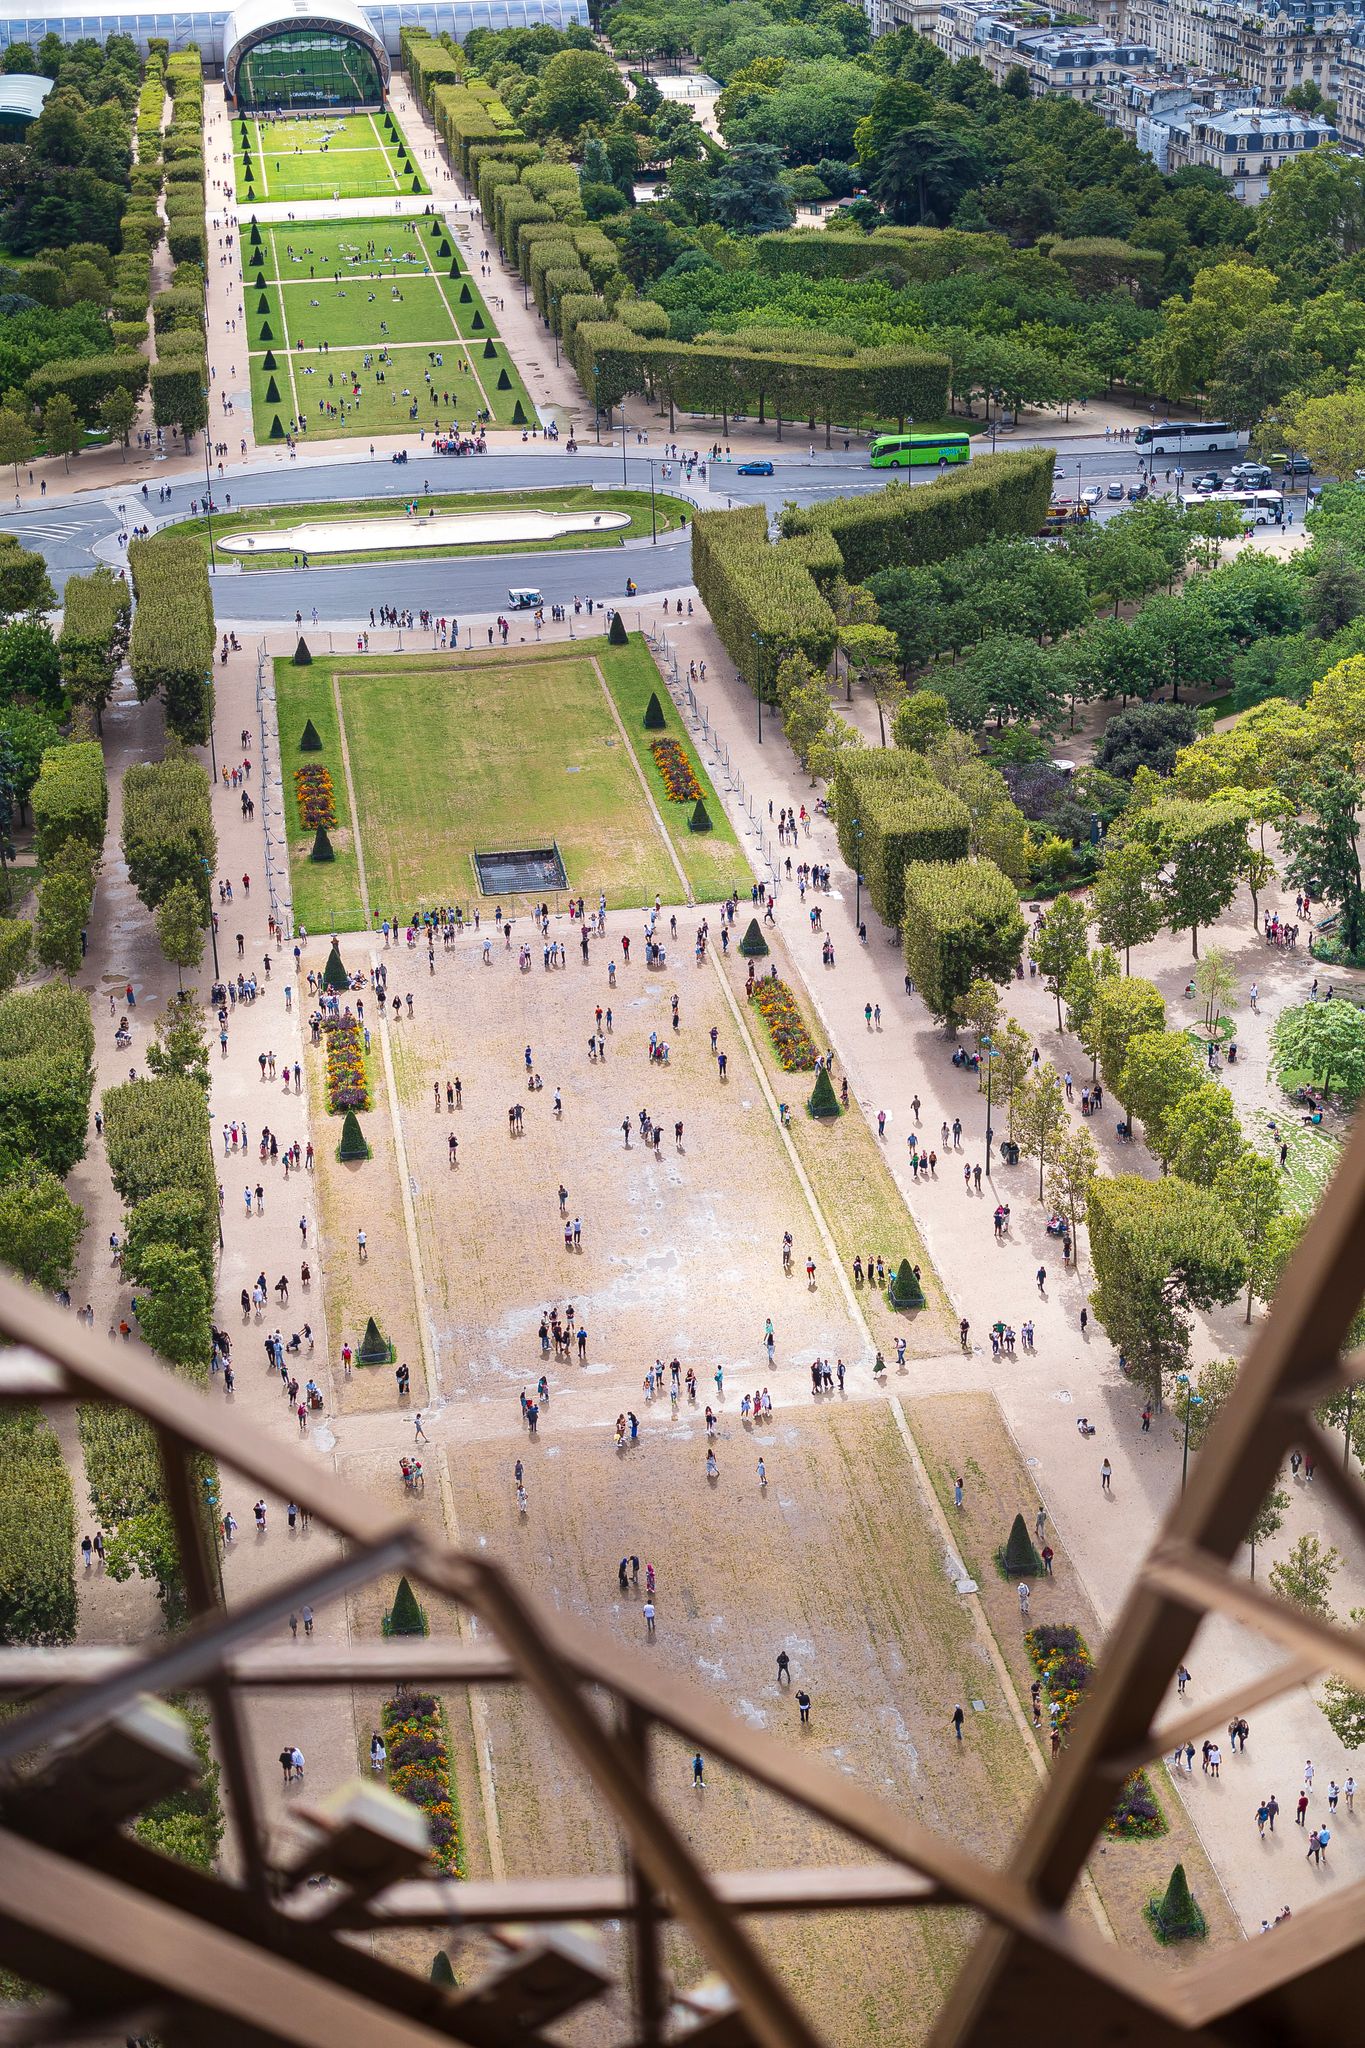 People gather at the Champ de Mars, a park just next to the Eiffel Tower. Taken from the Eiffel Tower elevator